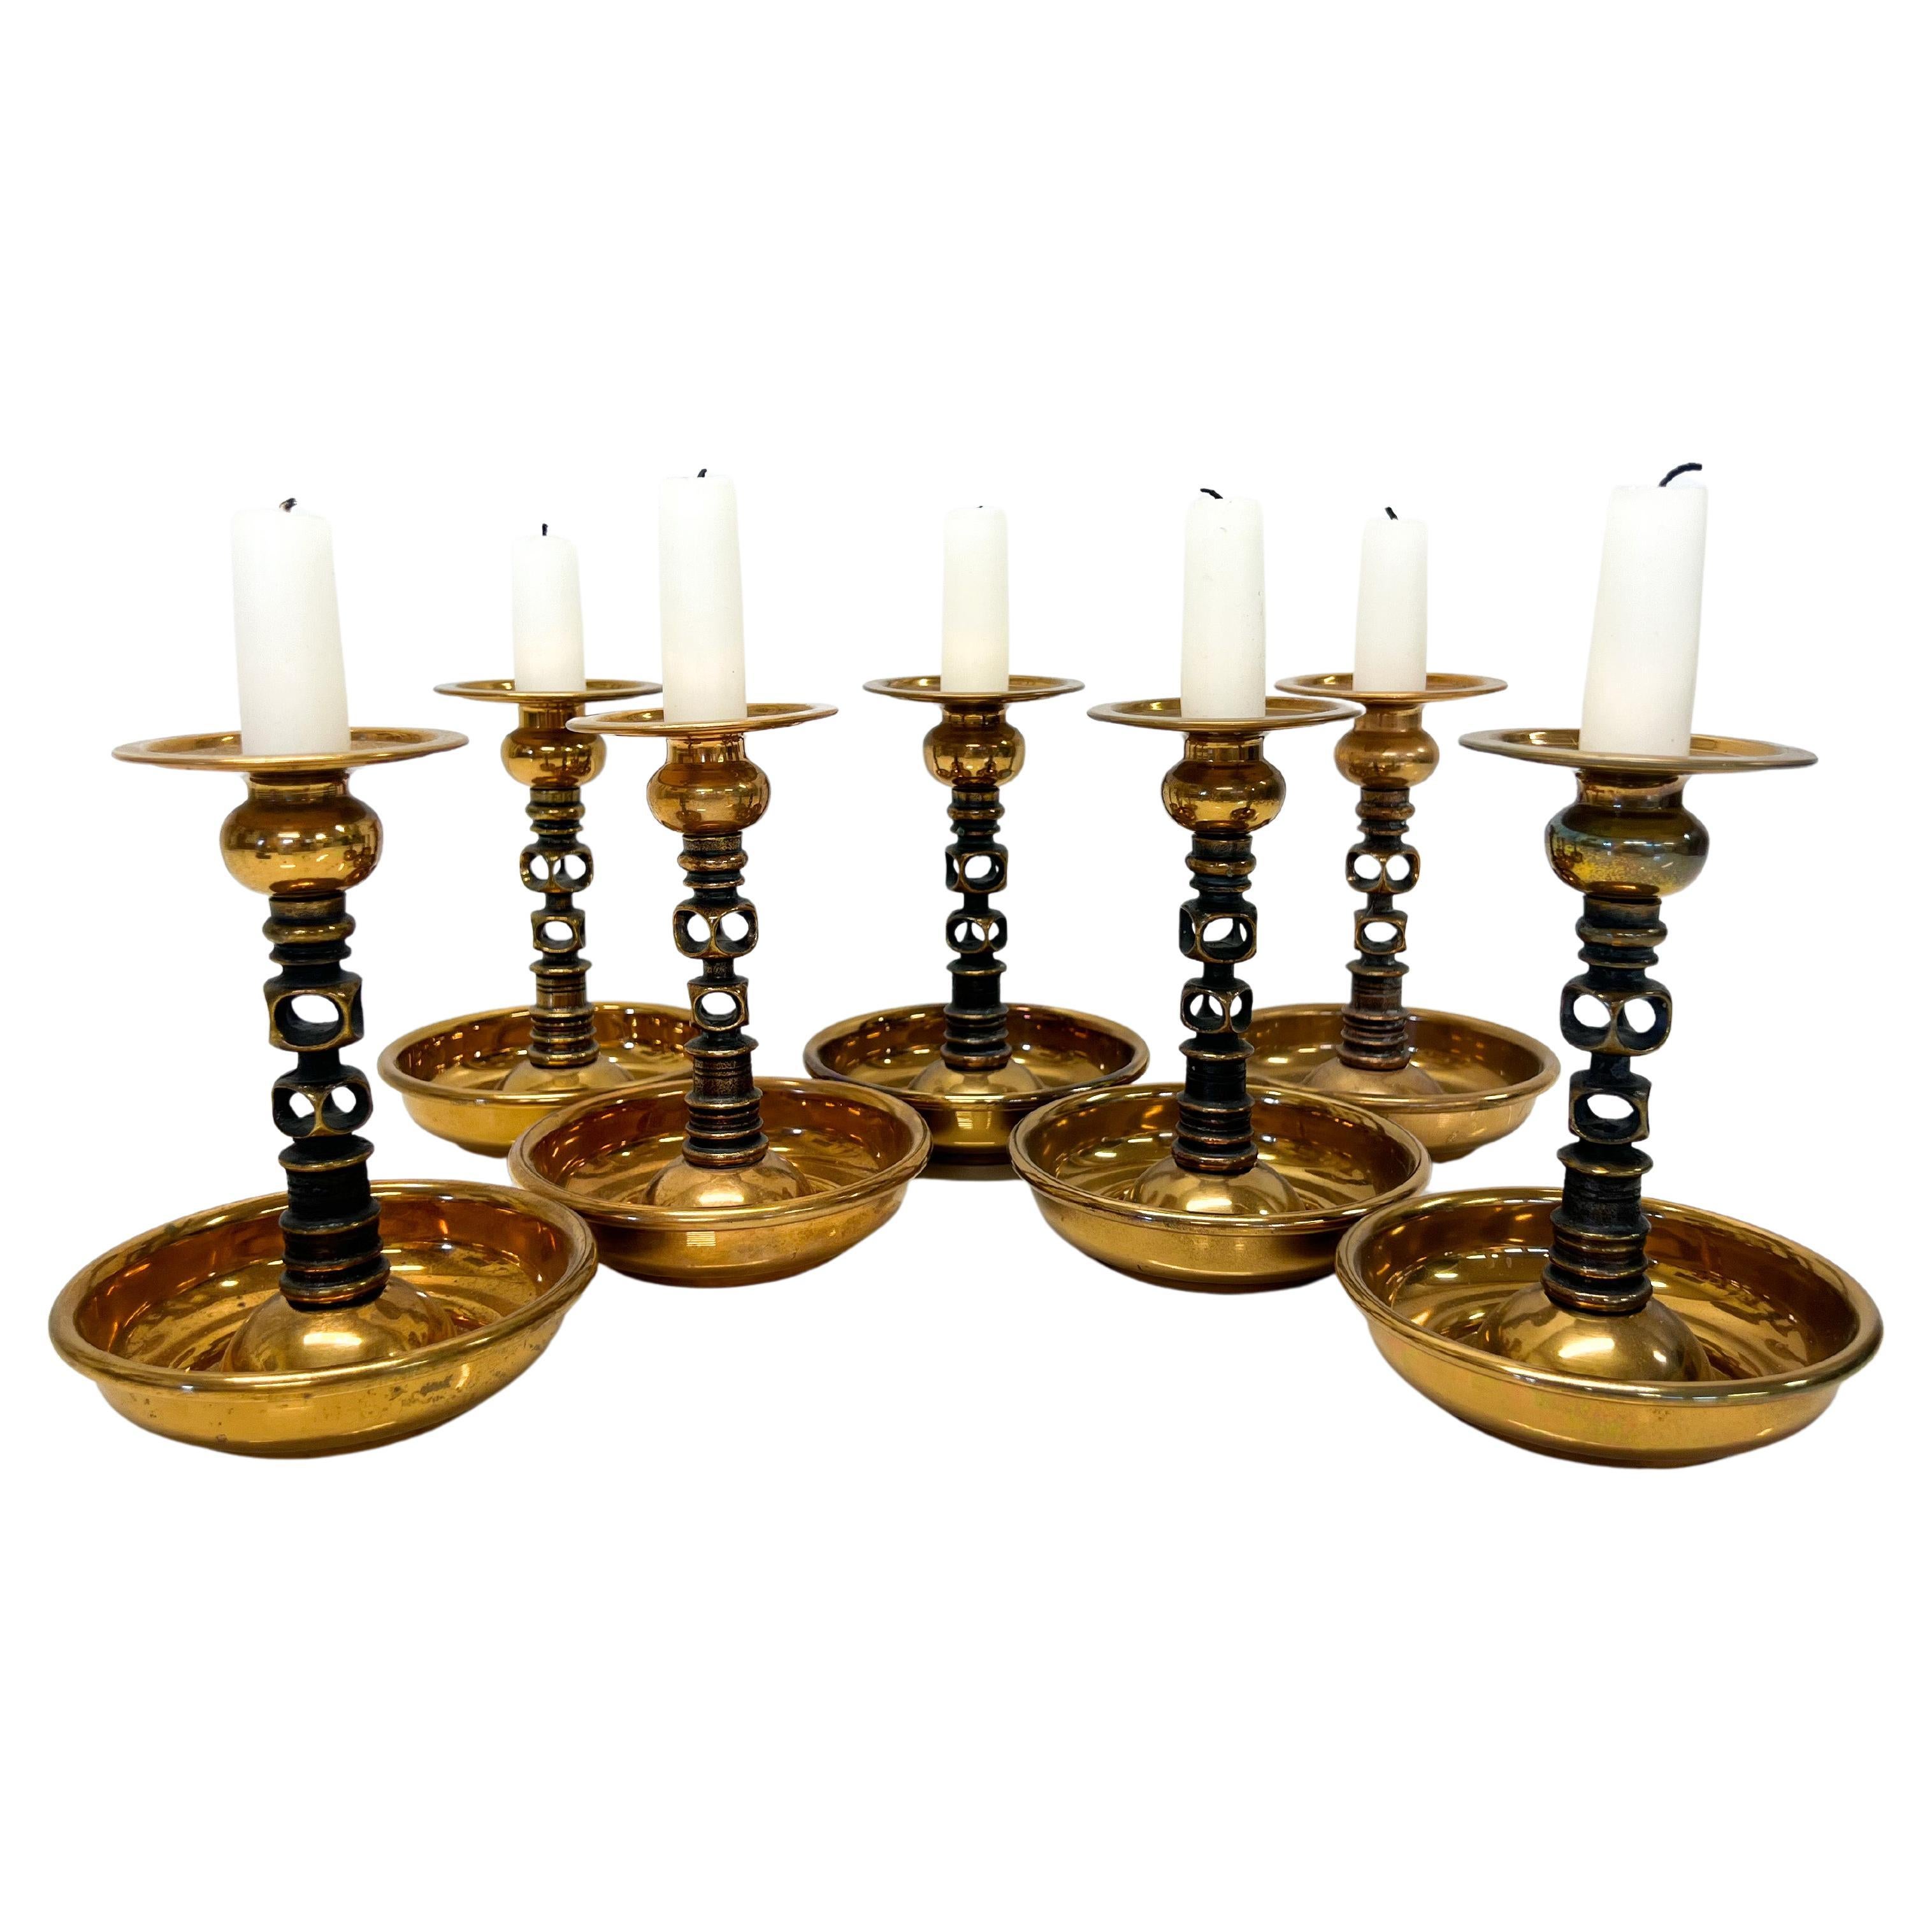 Abstract Candle Holder Jorma Laine Turun Hopea Finland 7pcs. Brass